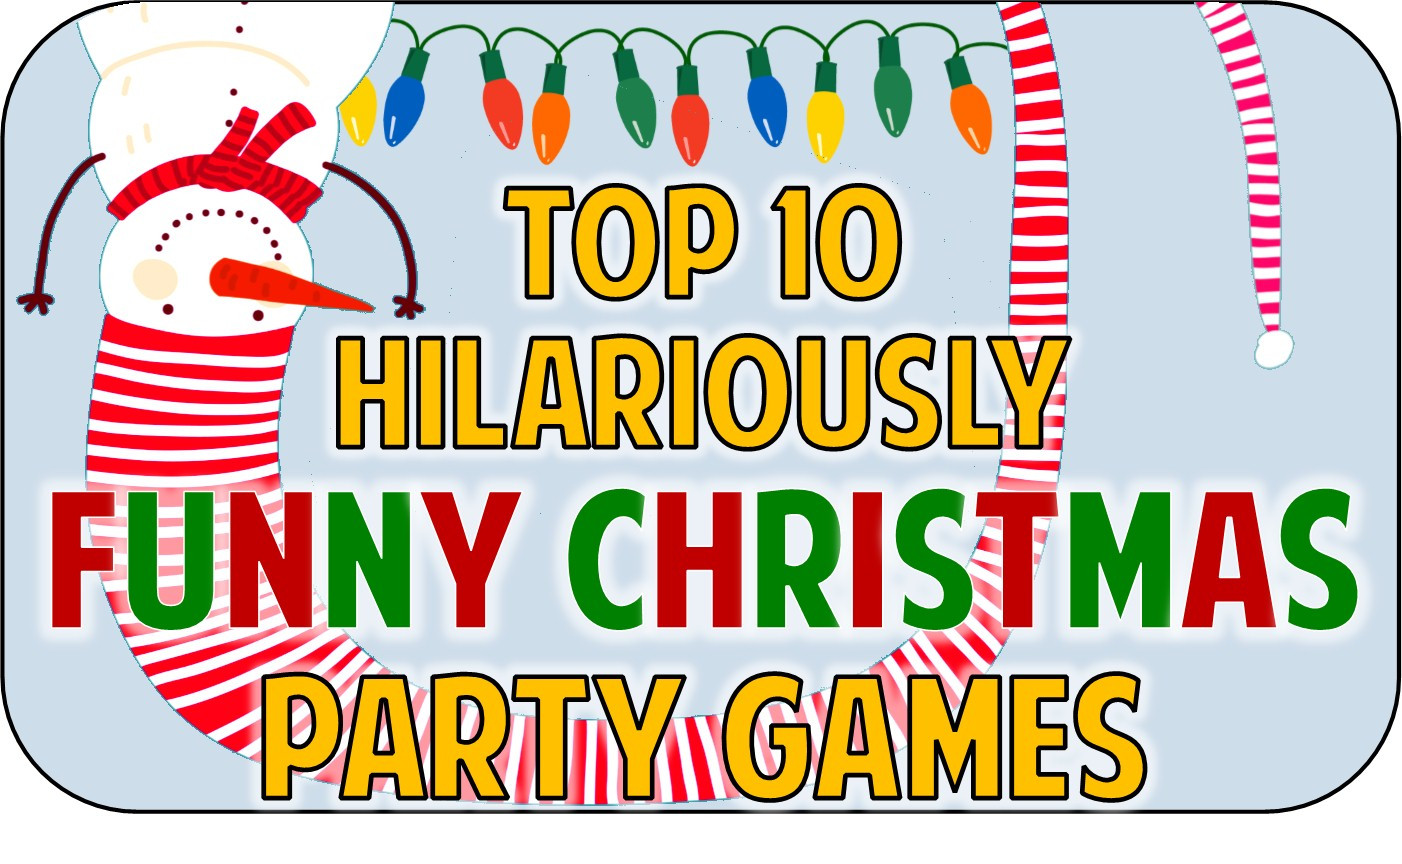 Fun Christmas Party Ideas
 Christmas Party fice Games